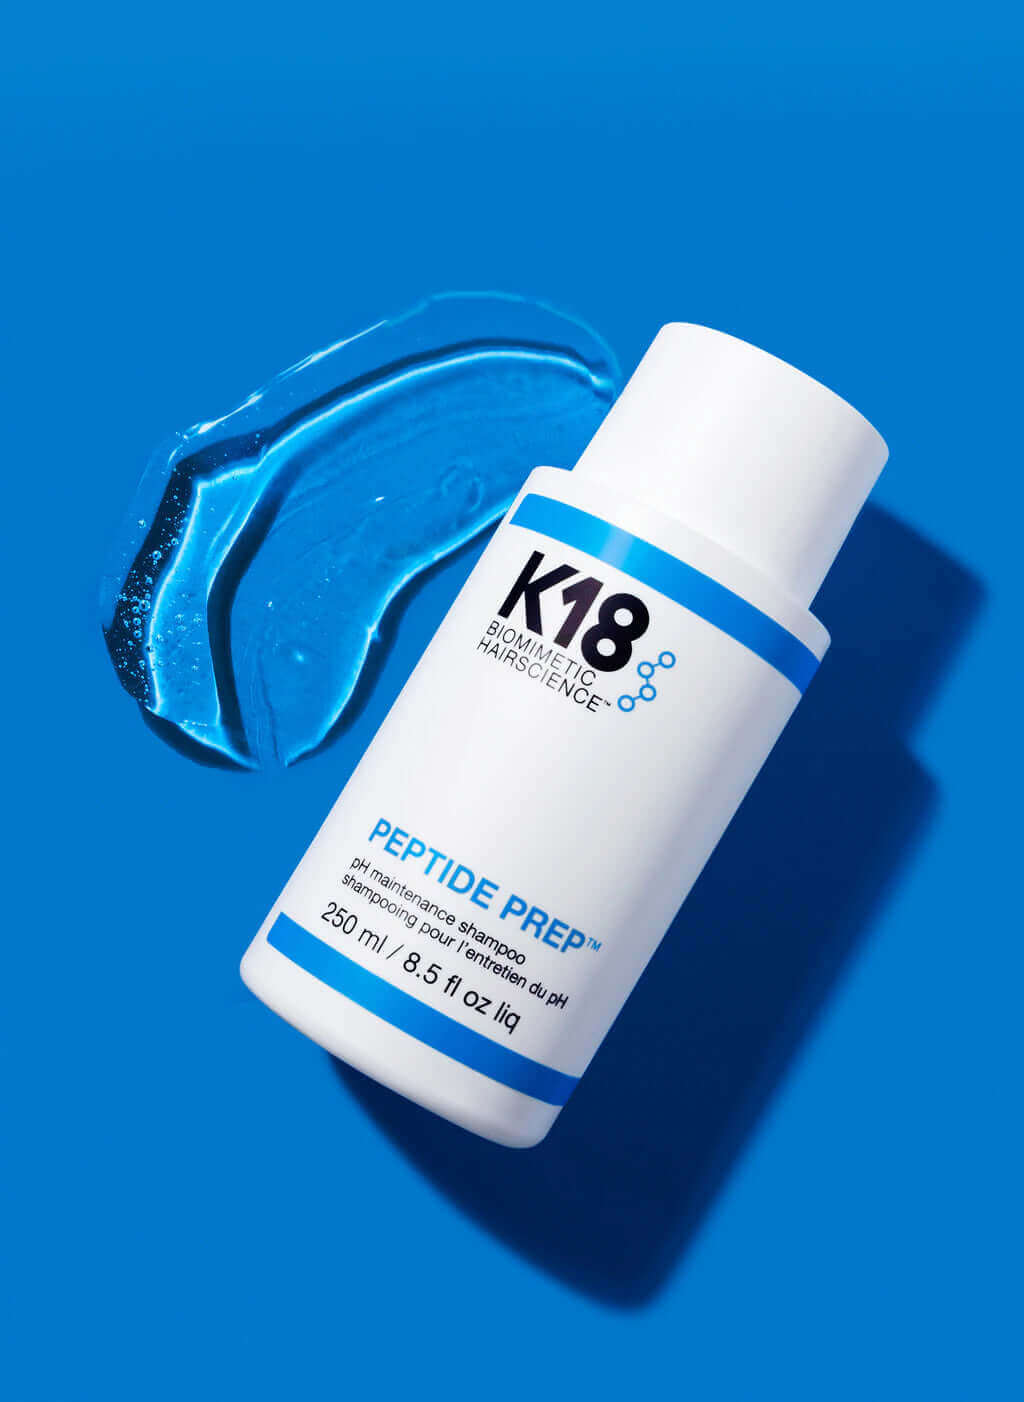 A bottle of K18 DAMAGE SHIELD pH Protective Shampoo by K18 Hair Repair on a blue background.